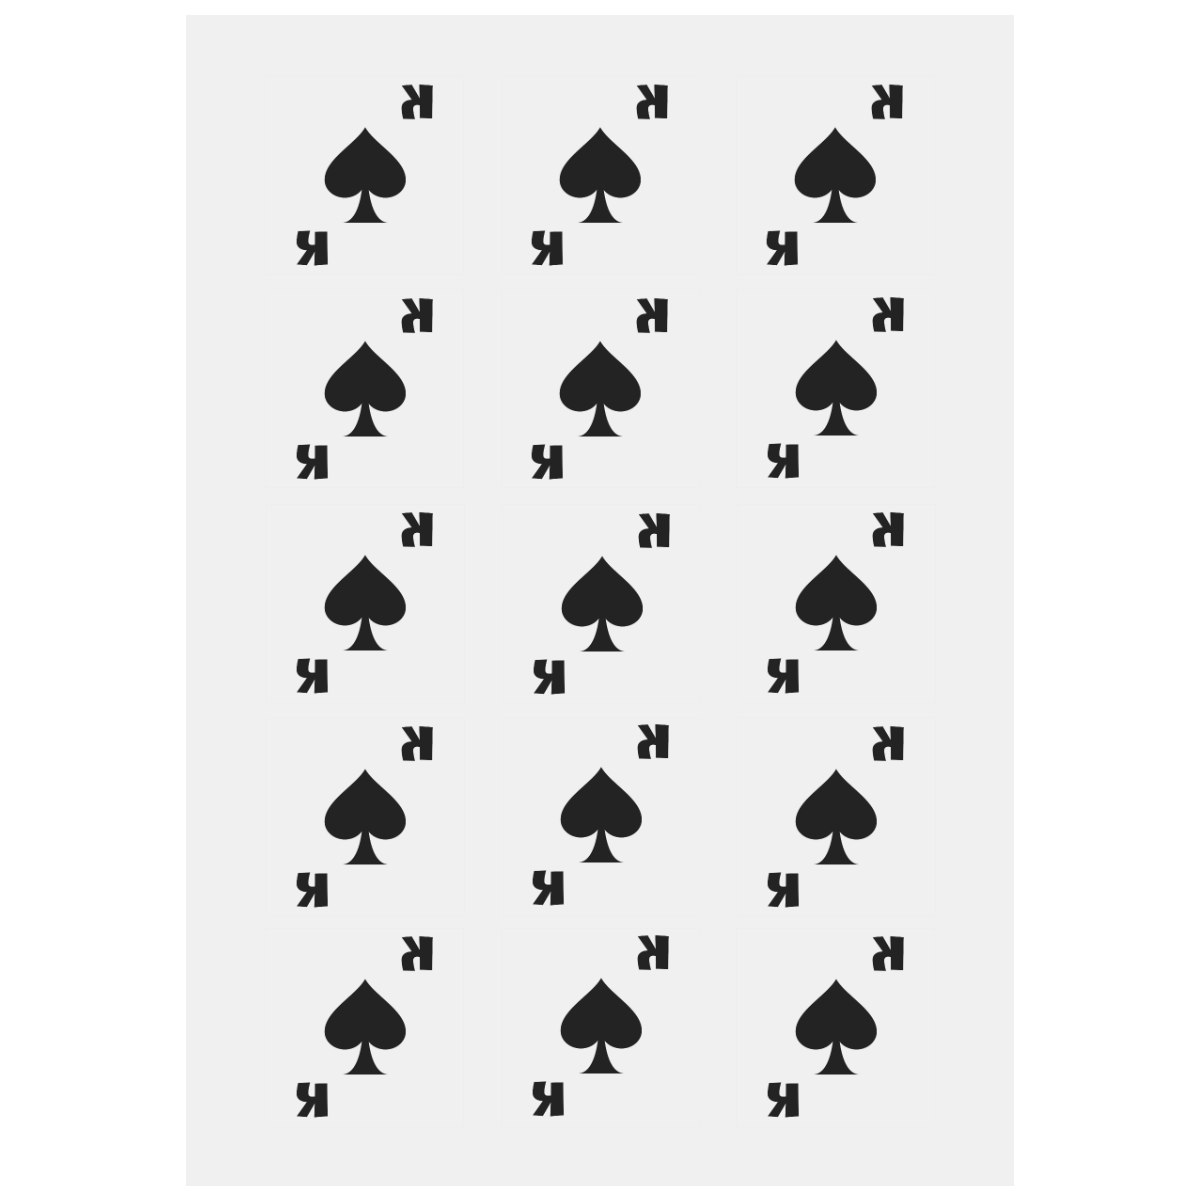 Playing Card King of Spades Personalized Temporary Tattoo (15 Pieces)